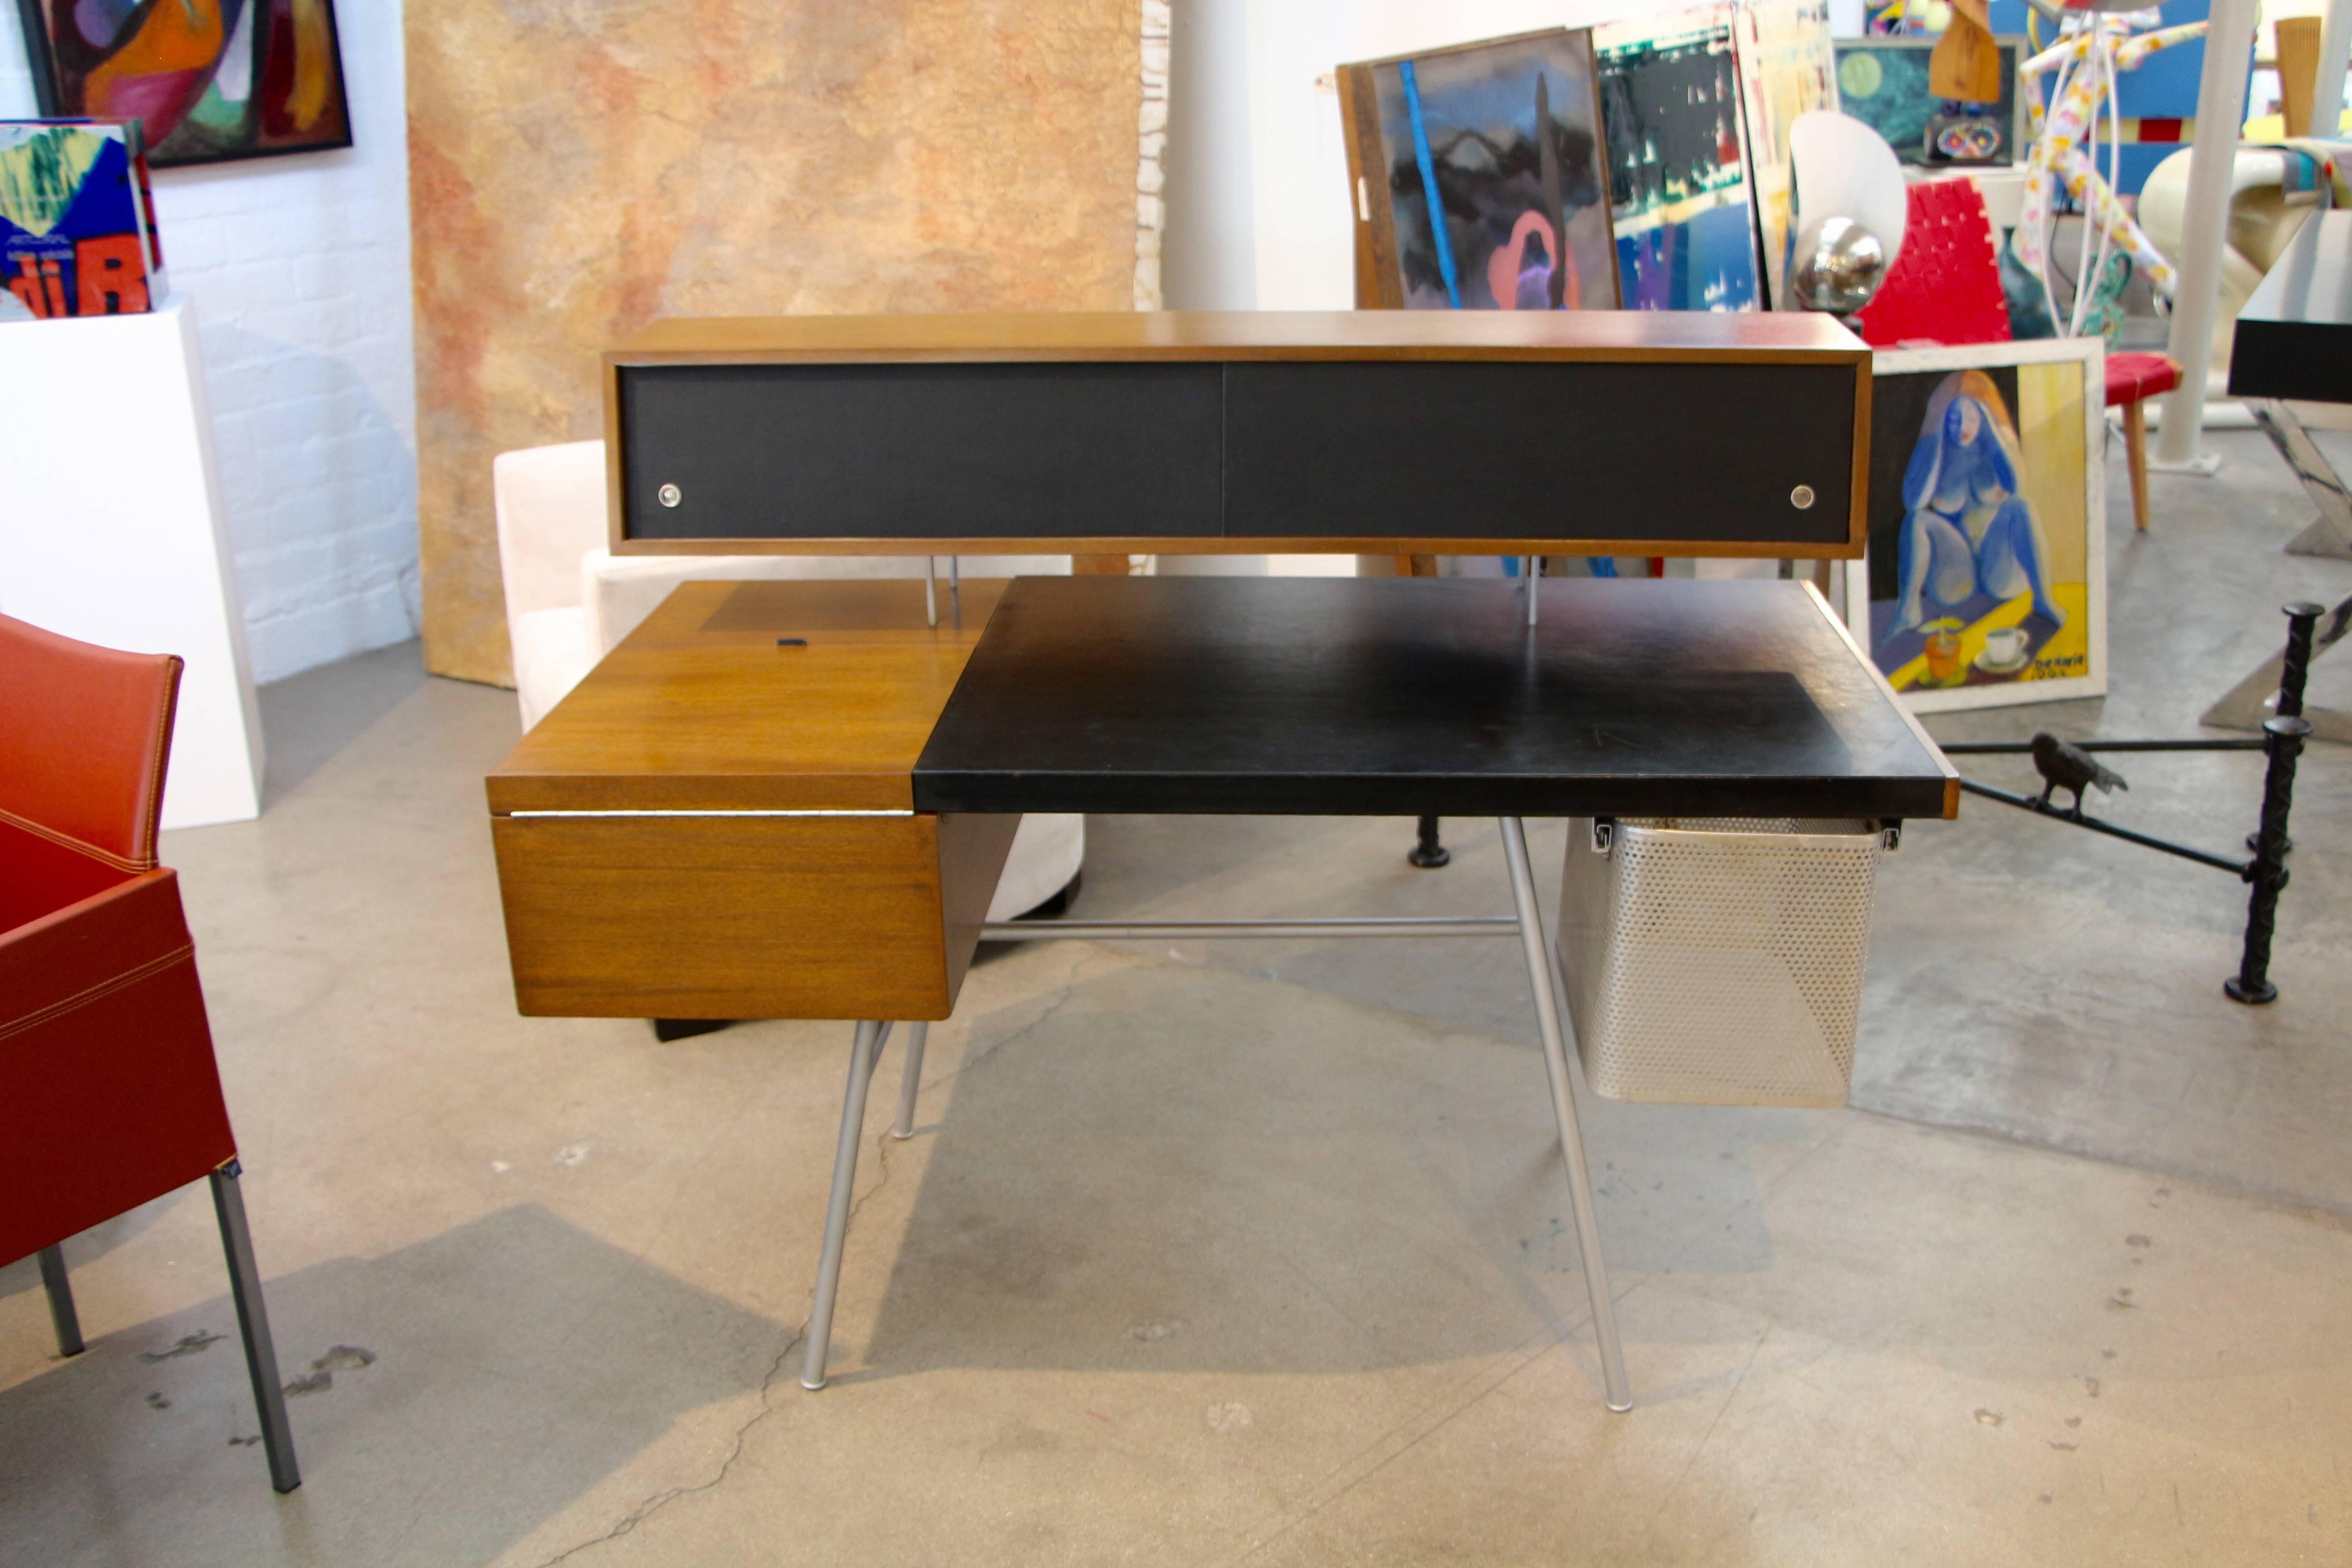 A somewhat rare executive home desk designed by George Nelson in the late 1940s. For the time it was a stunning design and is still relative today. We acquired this desk from the original owner's family and they were unsure of the exact year it was